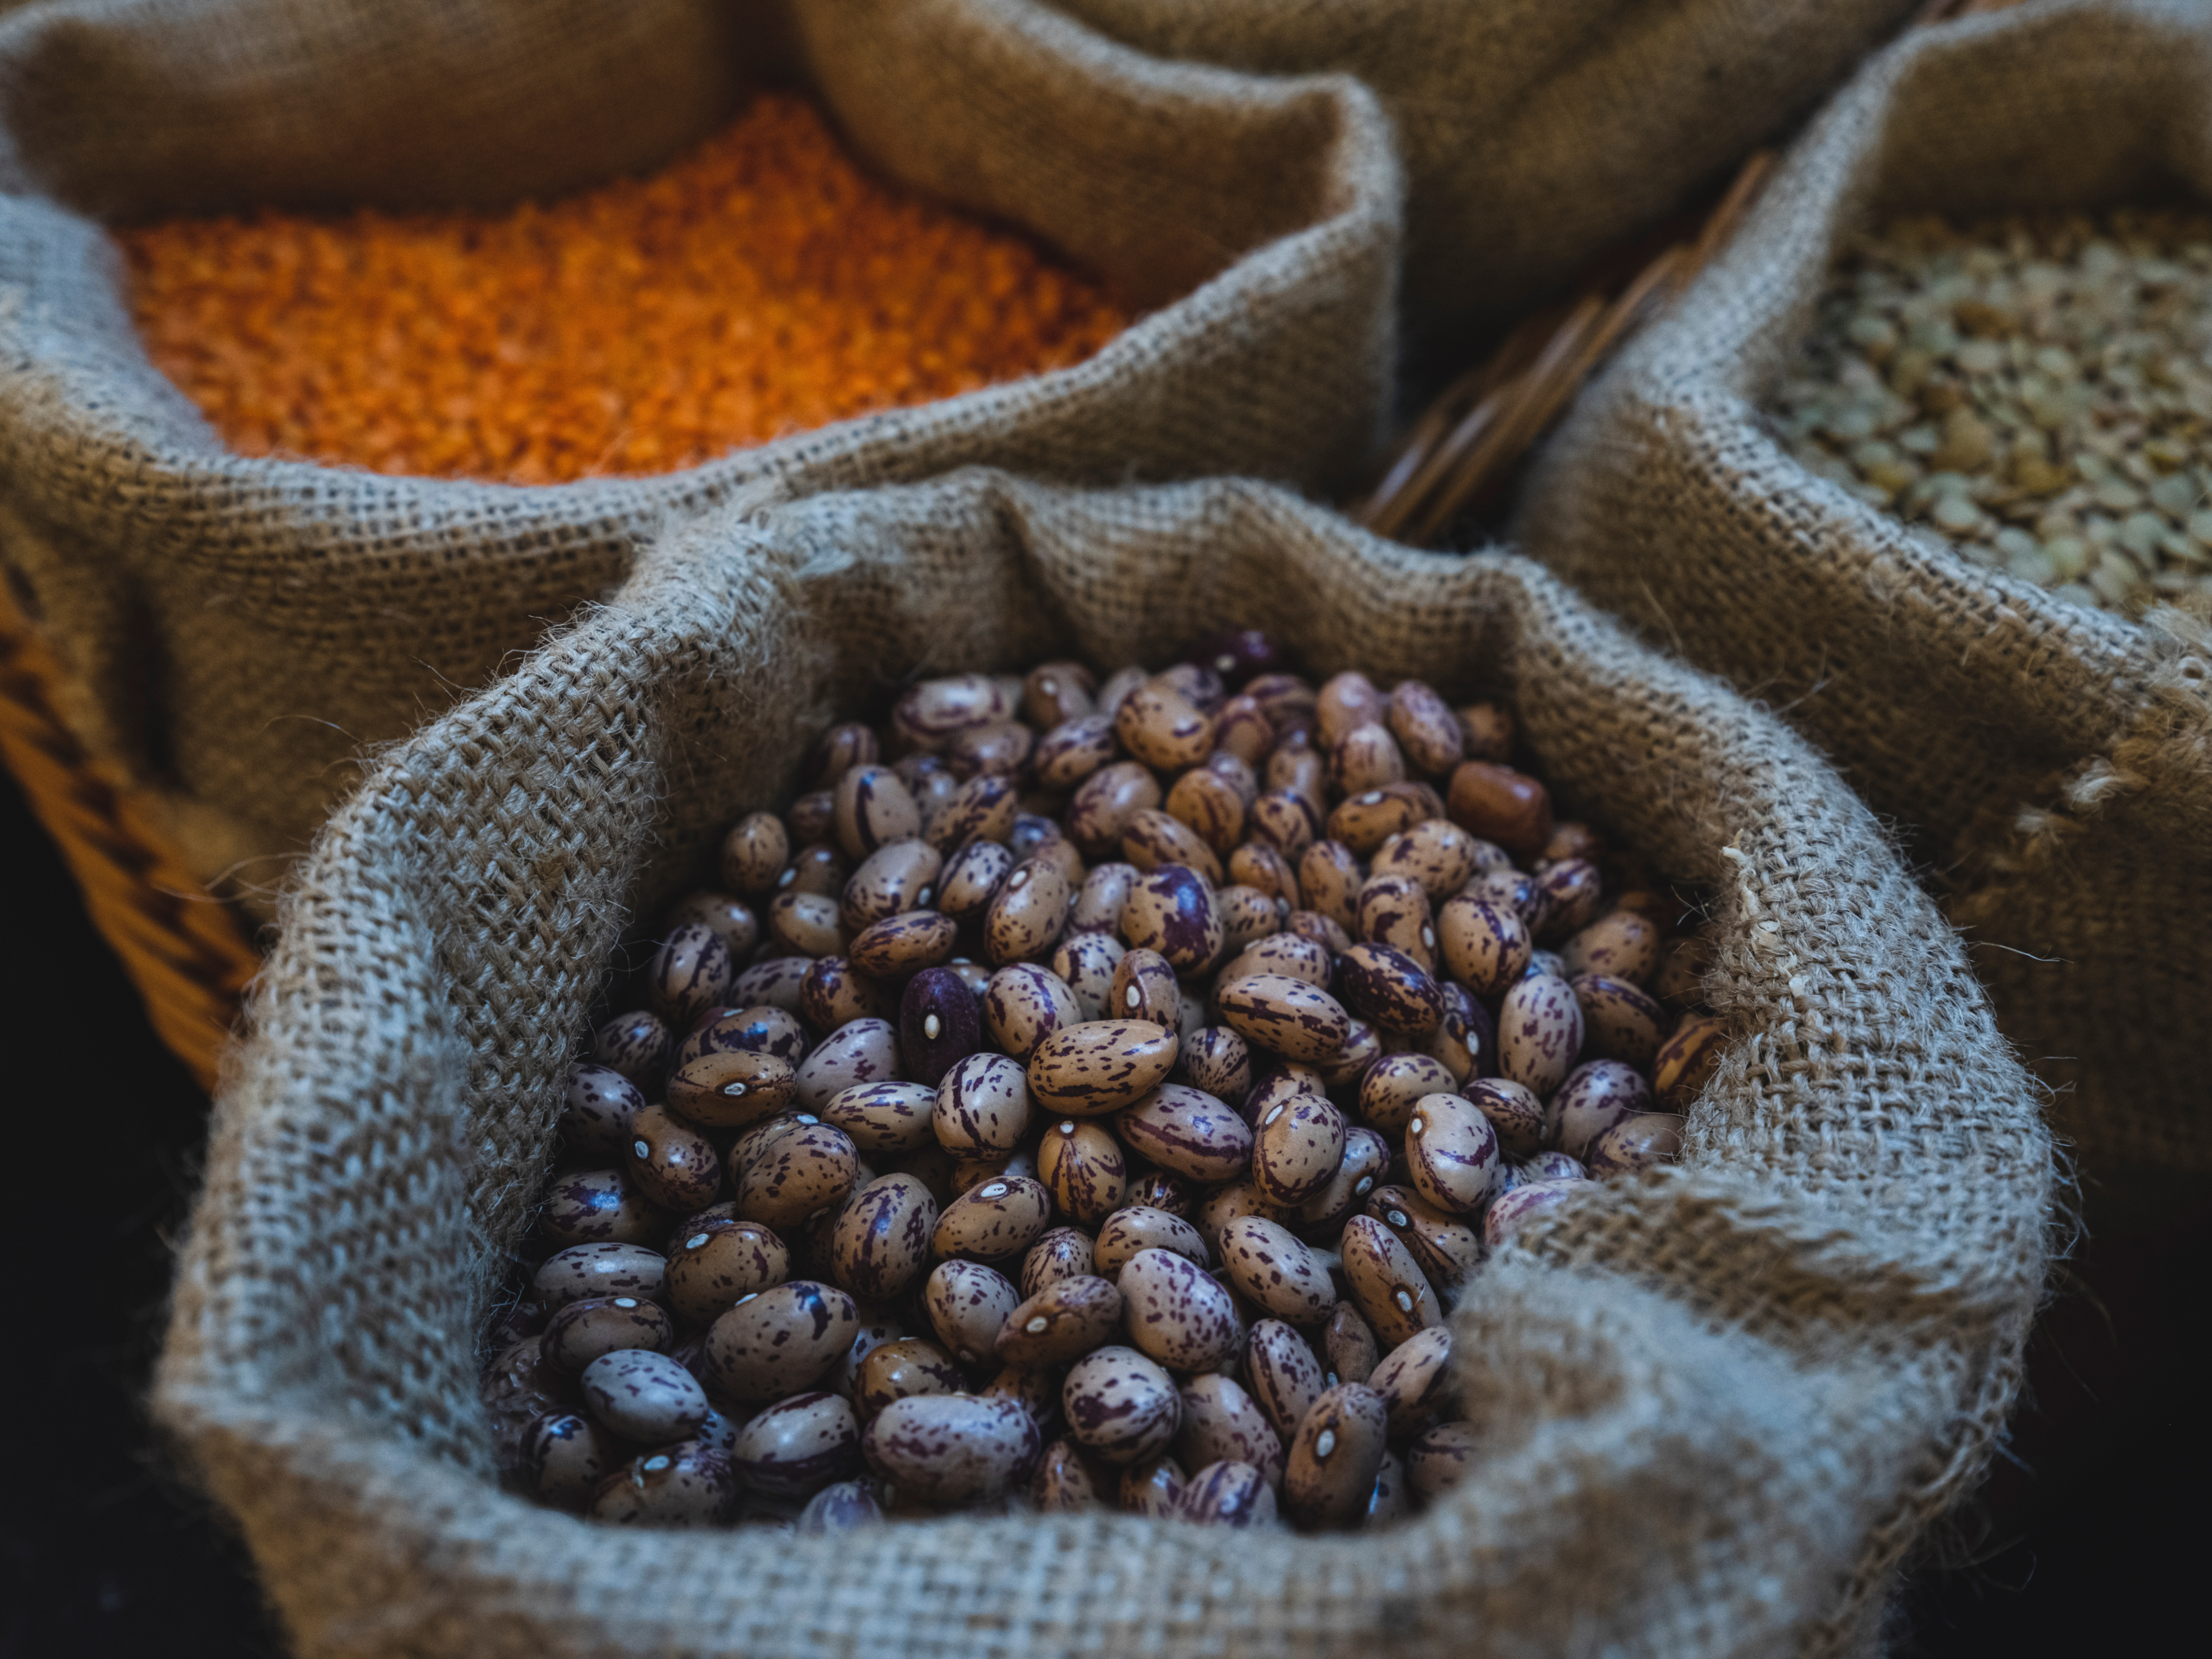 a close up of fresh legumes in the market